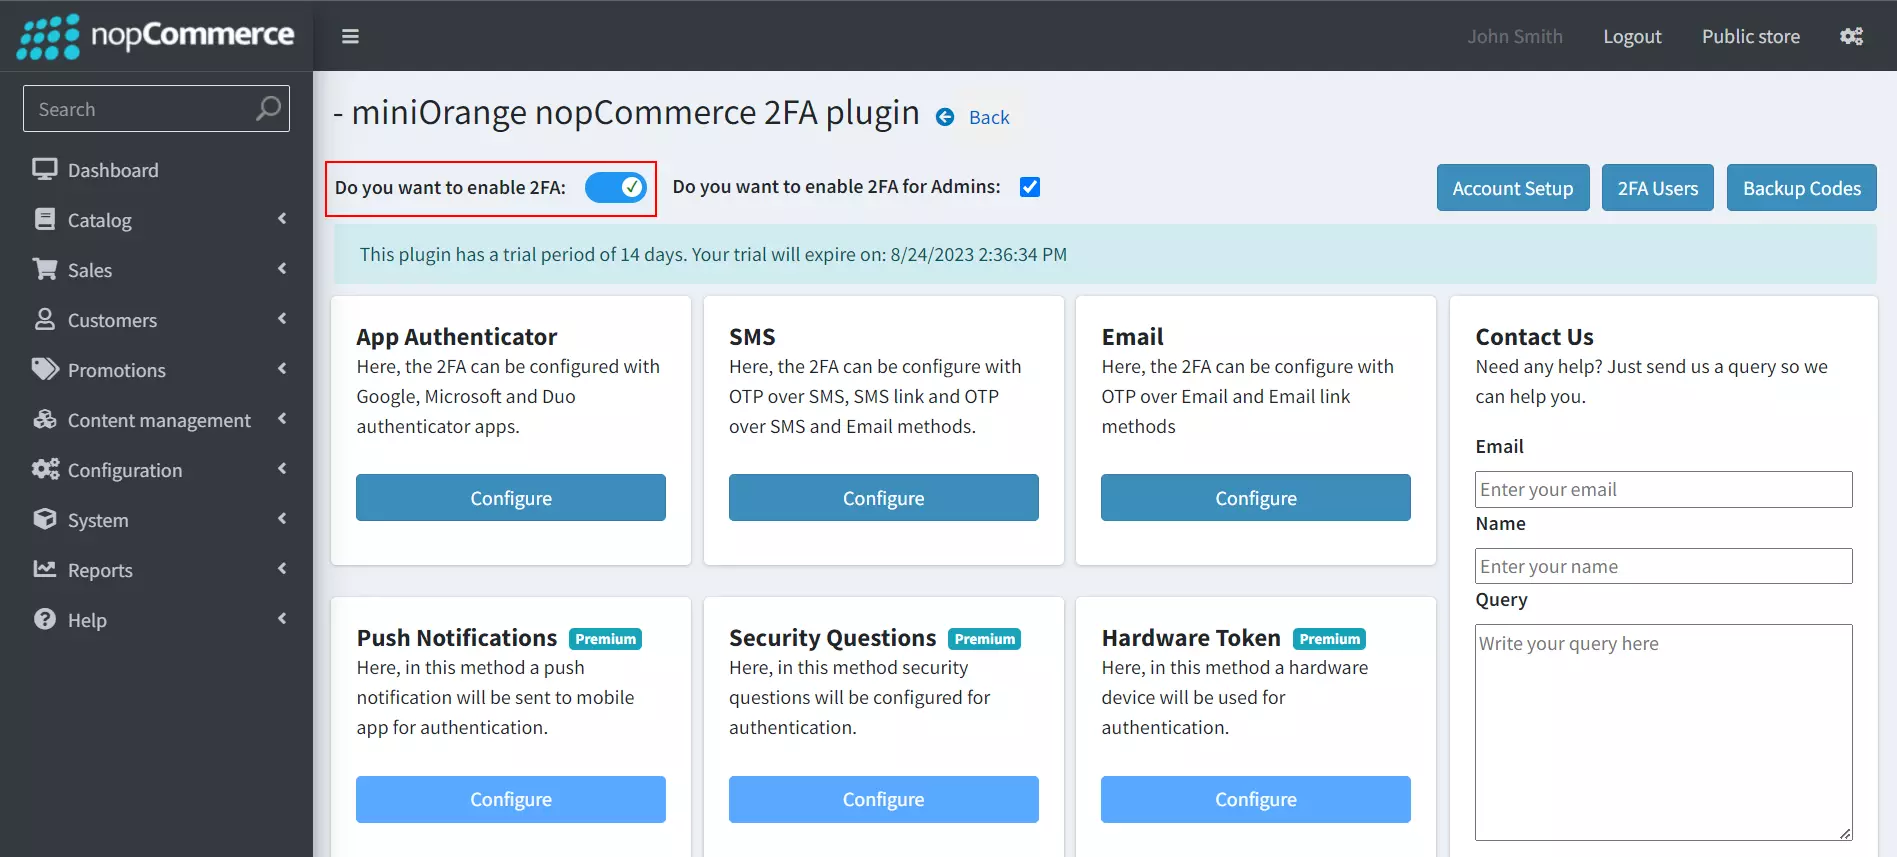 nopCommerce Two-factor Authentication using OTP over Email | nopCommerce 2FA - Enable nopCommerce 2FA for users